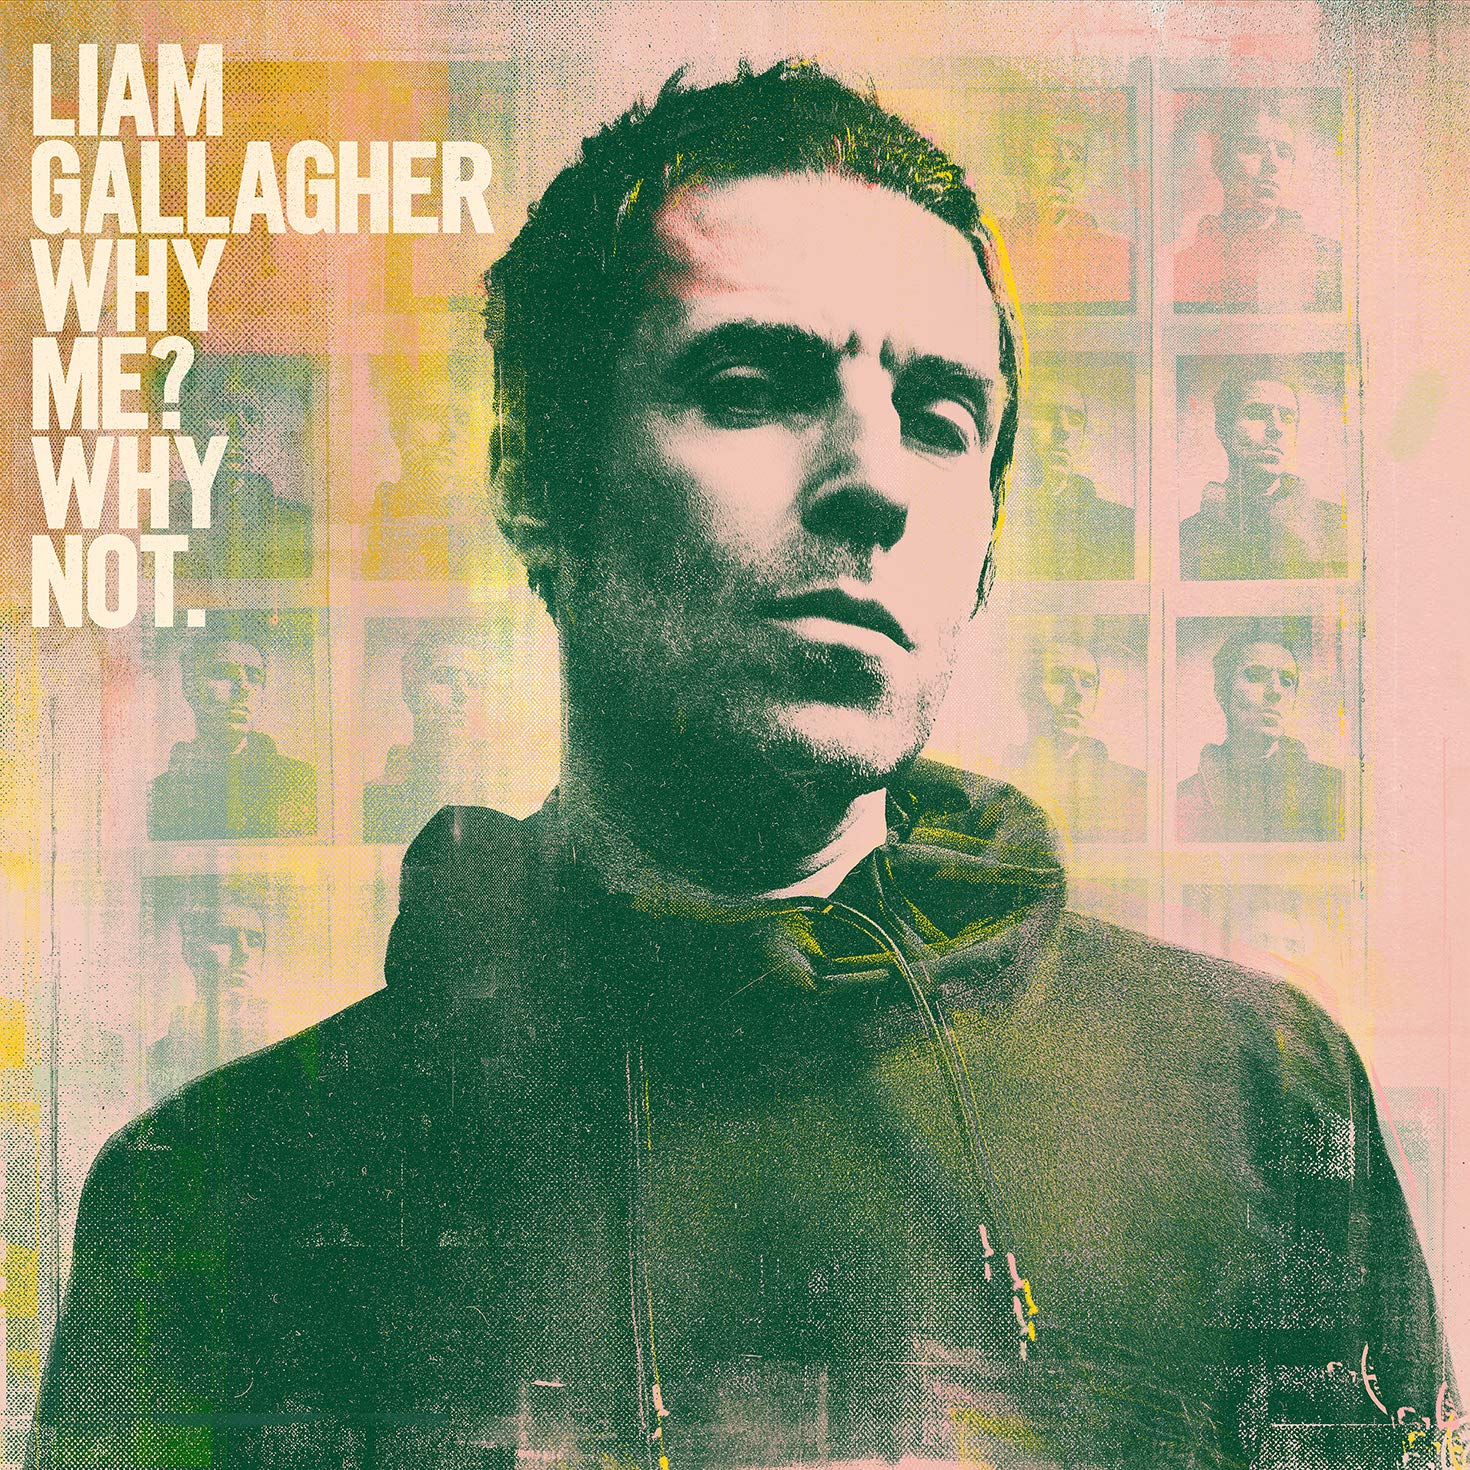 Liam Gallagher - Why Me? Why Not. (Deluxe Edition) (2019) [FLAC 24bit/44,1kHz]